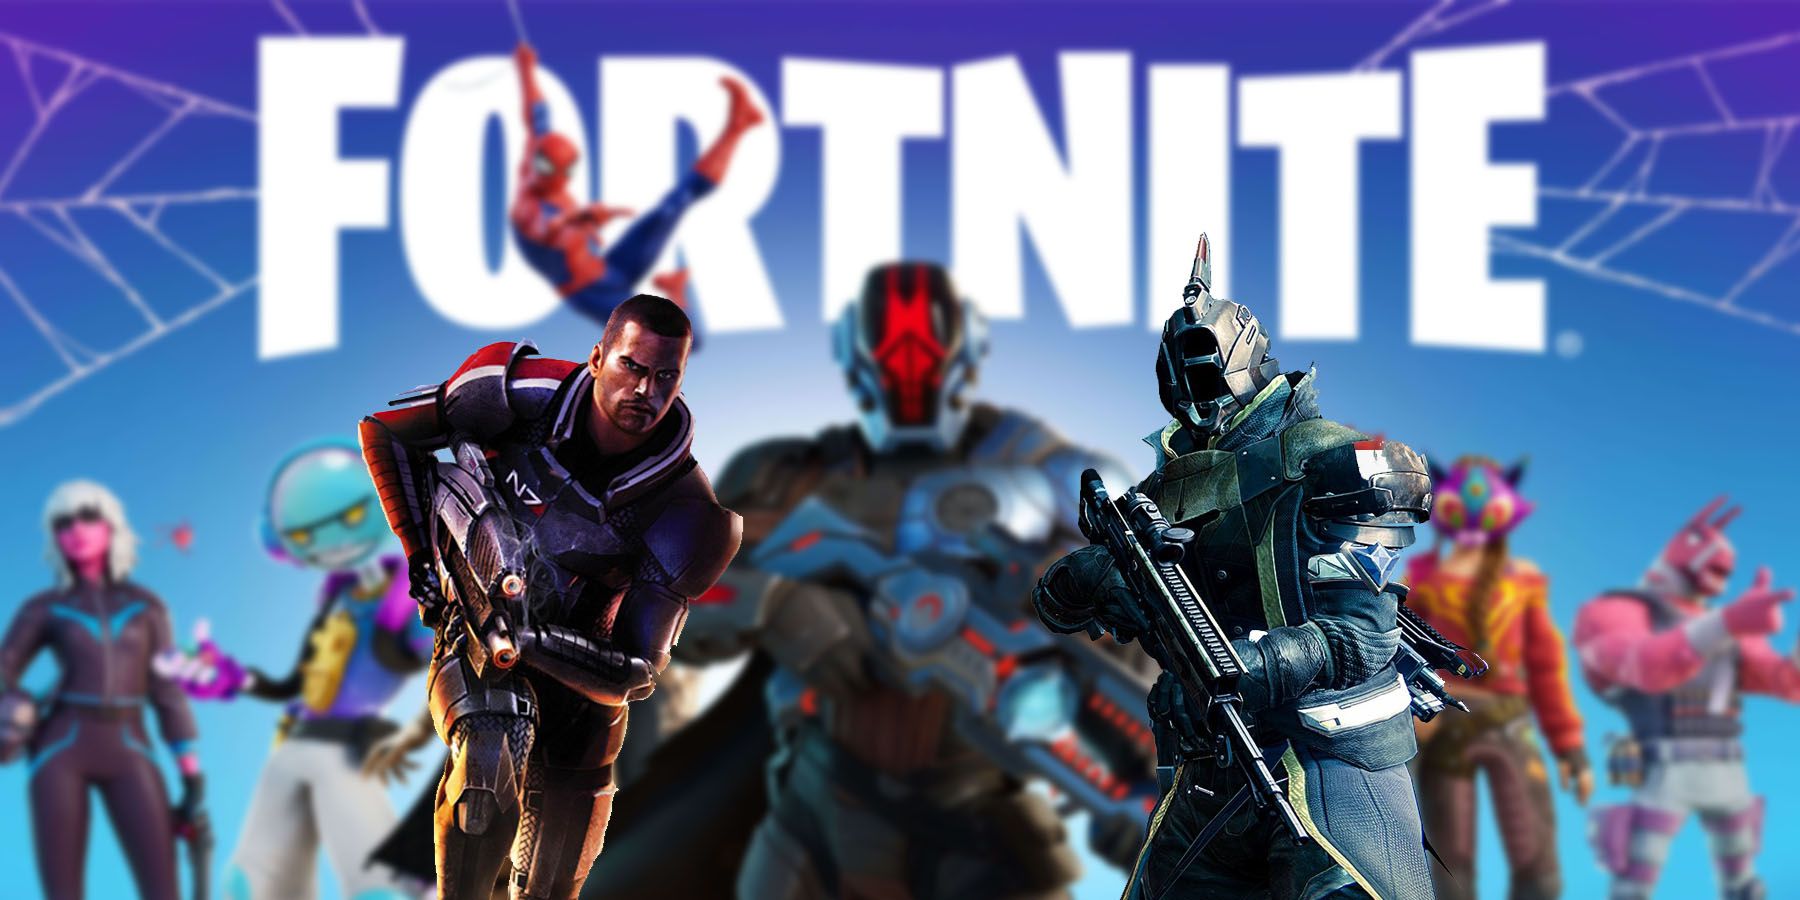 Fortnite Survey Hints Possible Crossovers With Destiny, Avatar, Mass Effect